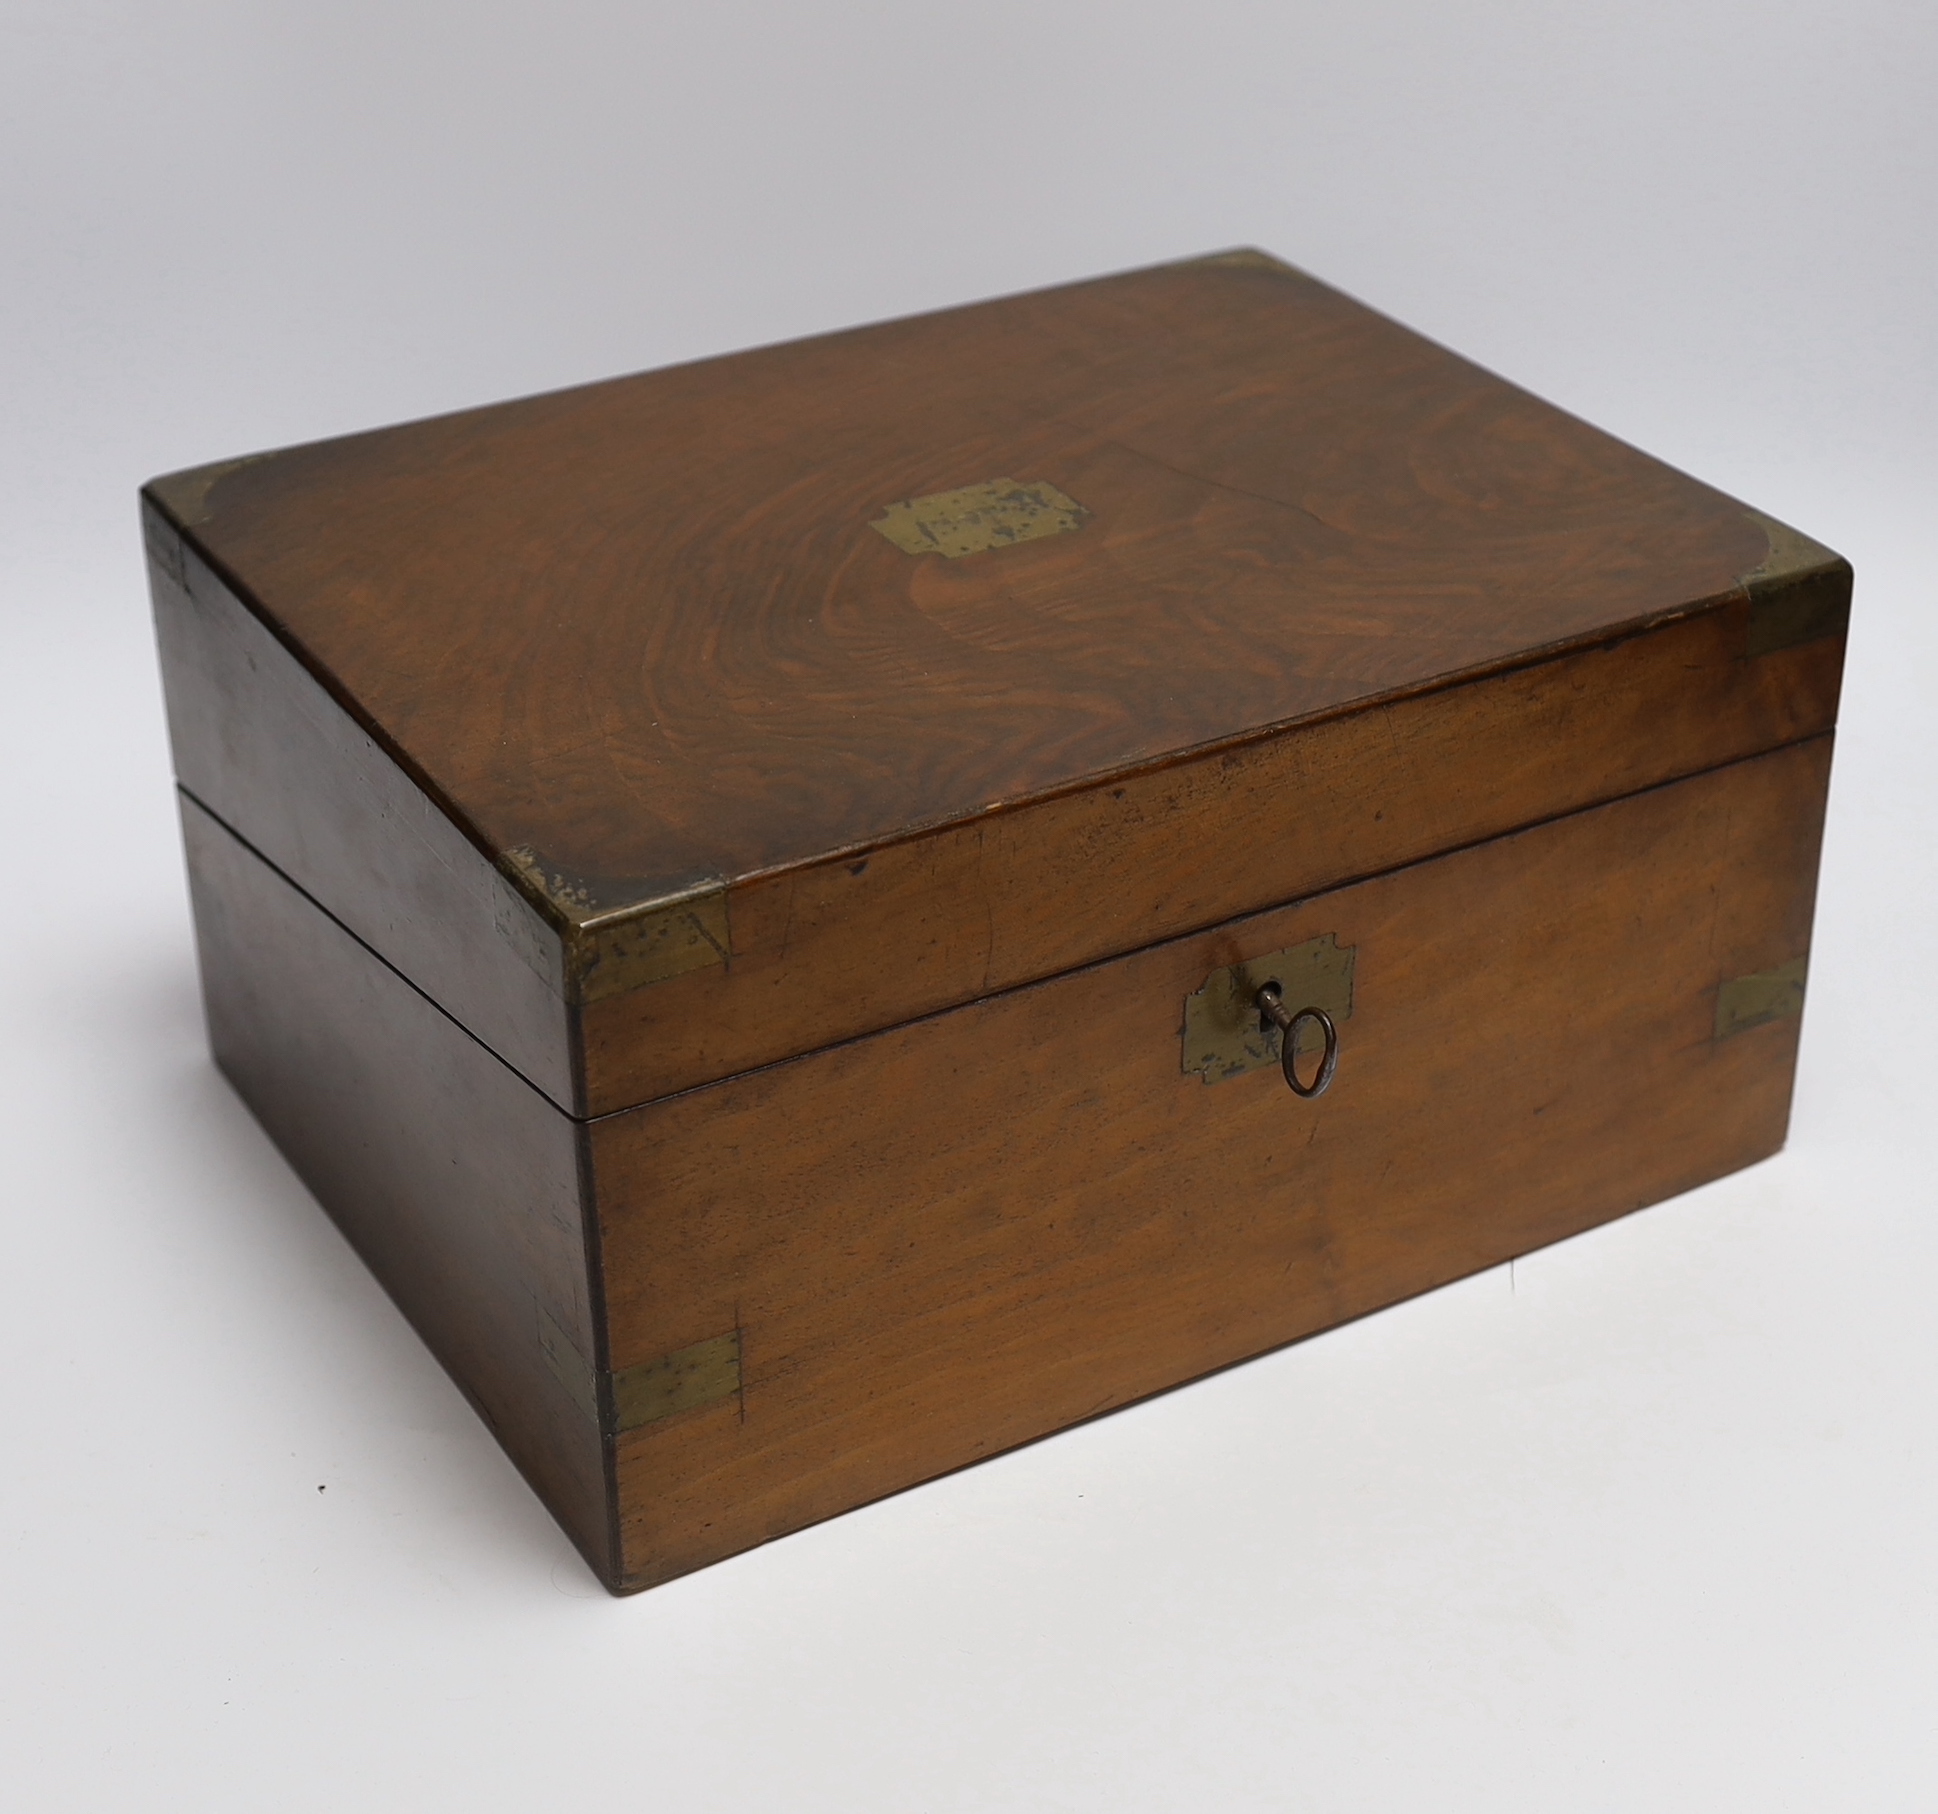 A tambour stationery box and a walnut writing slope, widest 34.5cm